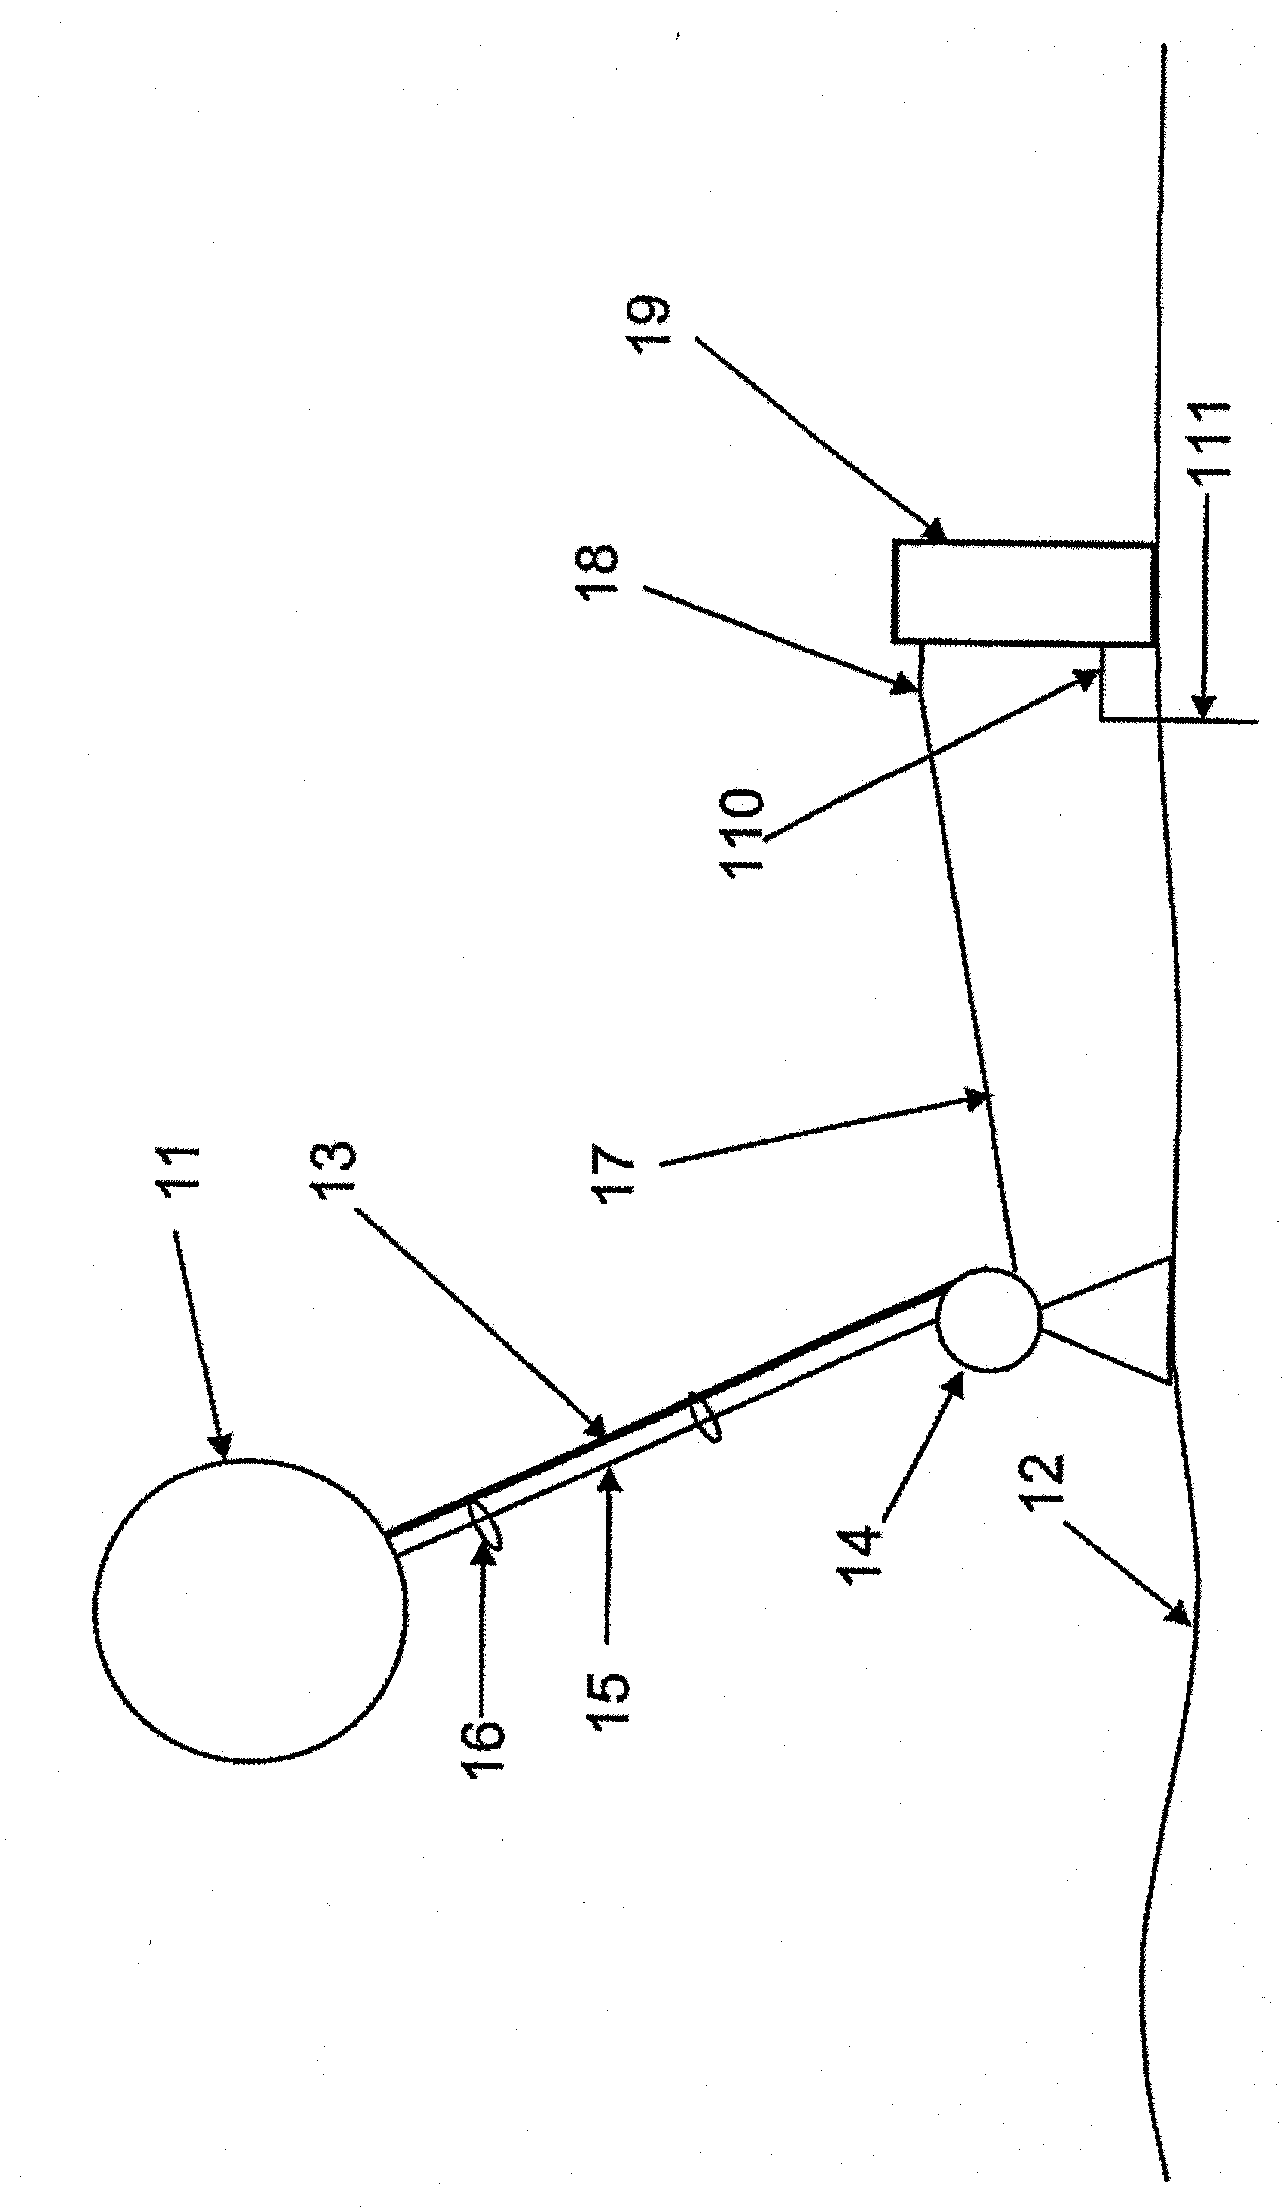 Apparatus and related methods for weather modification by electrical processes in the atmosphere